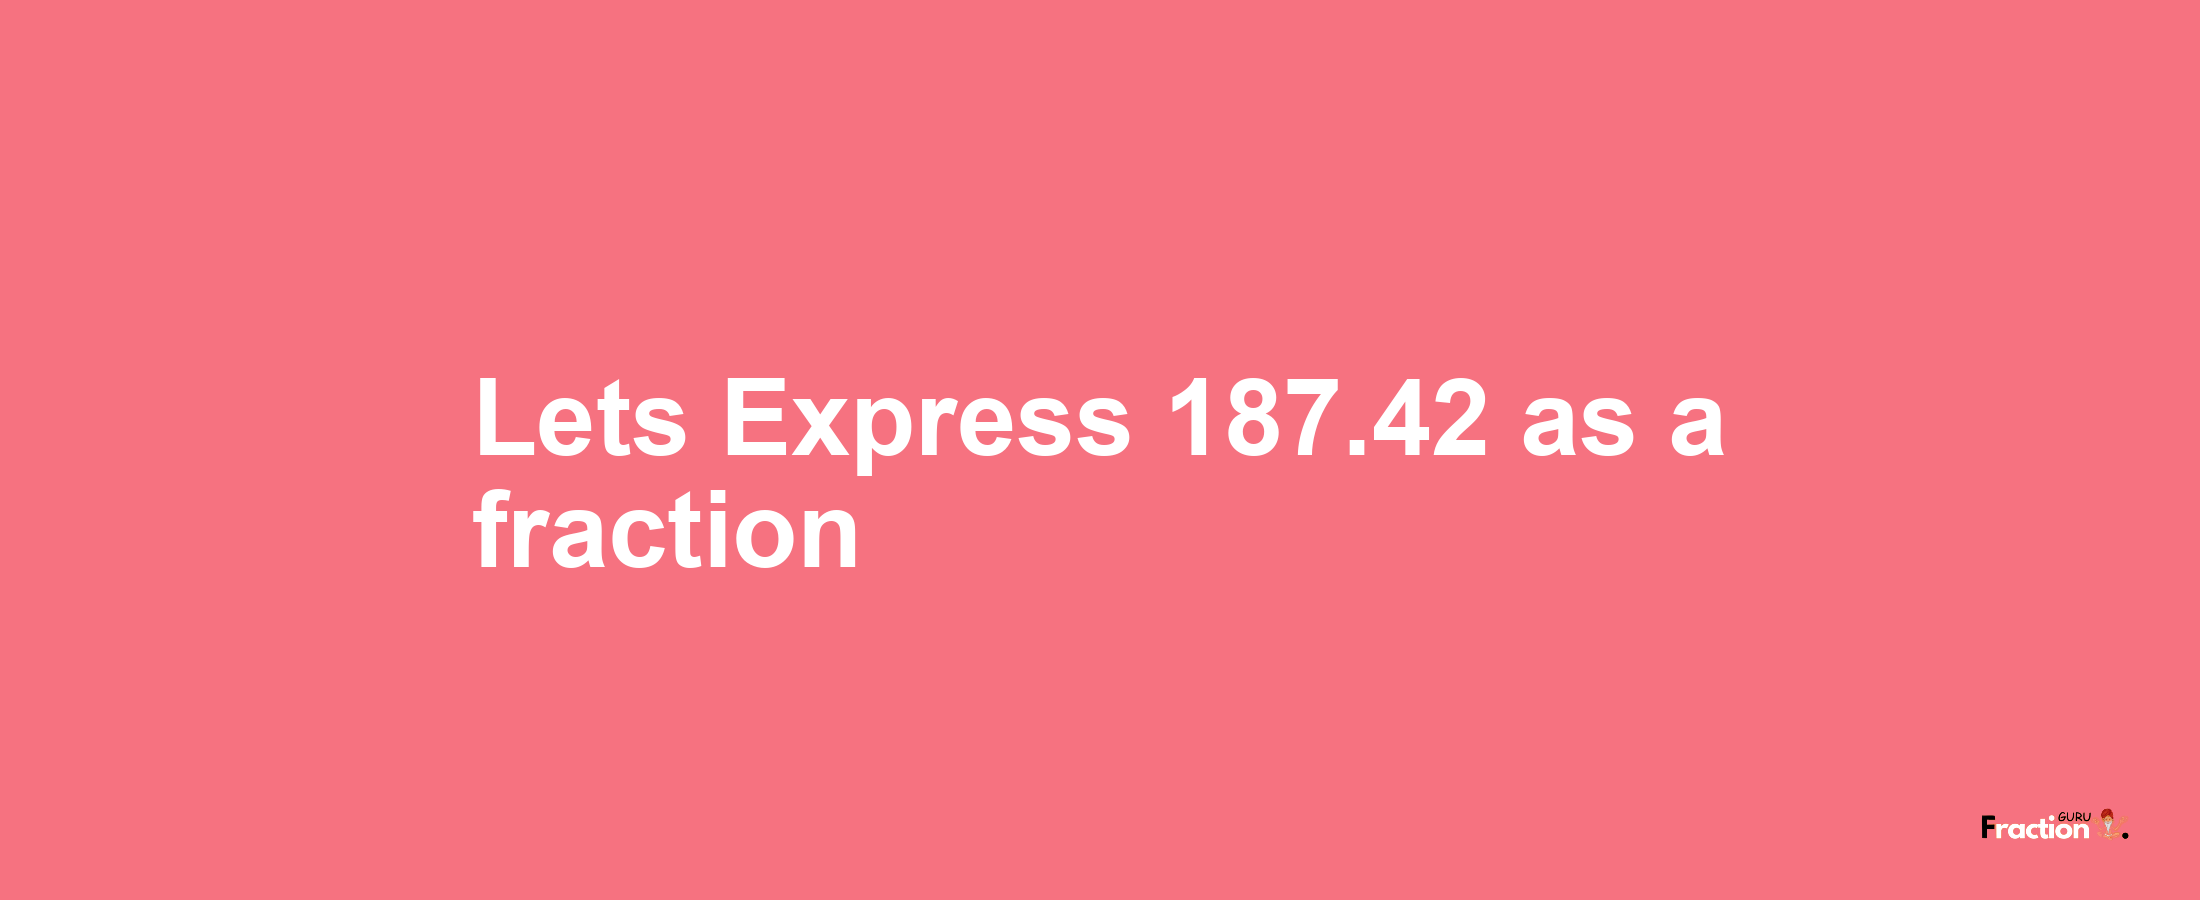 Lets Express 187.42 as afraction